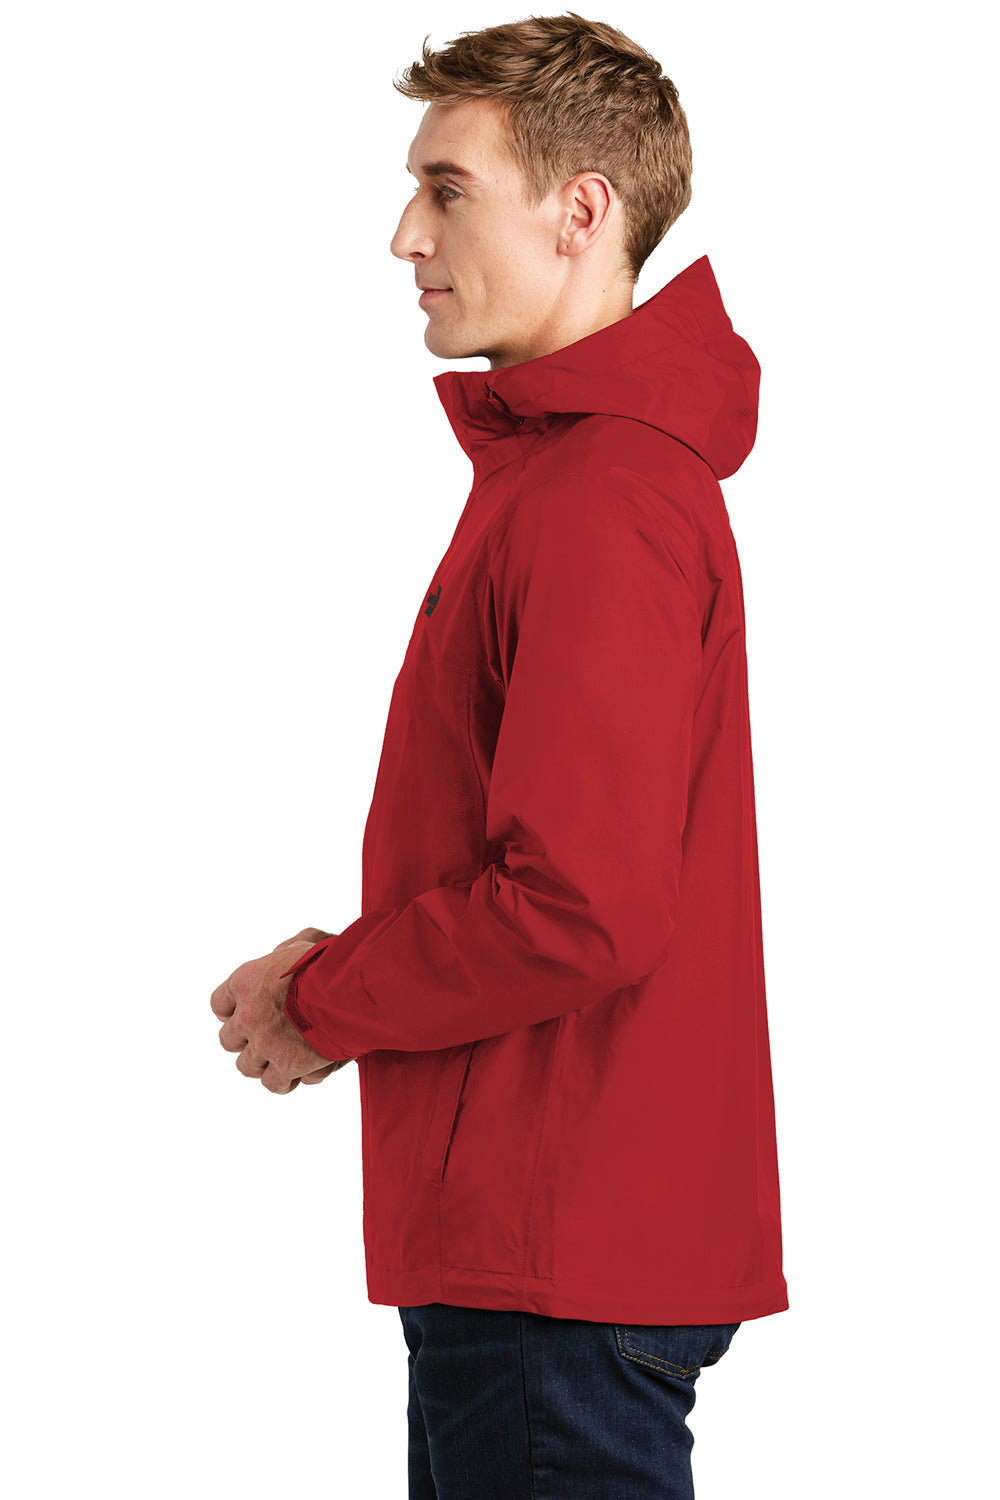 The North Face NF0A3LH4 Mens DryVent Waterproof Full Zip Hooded Jacket Rage Red Side